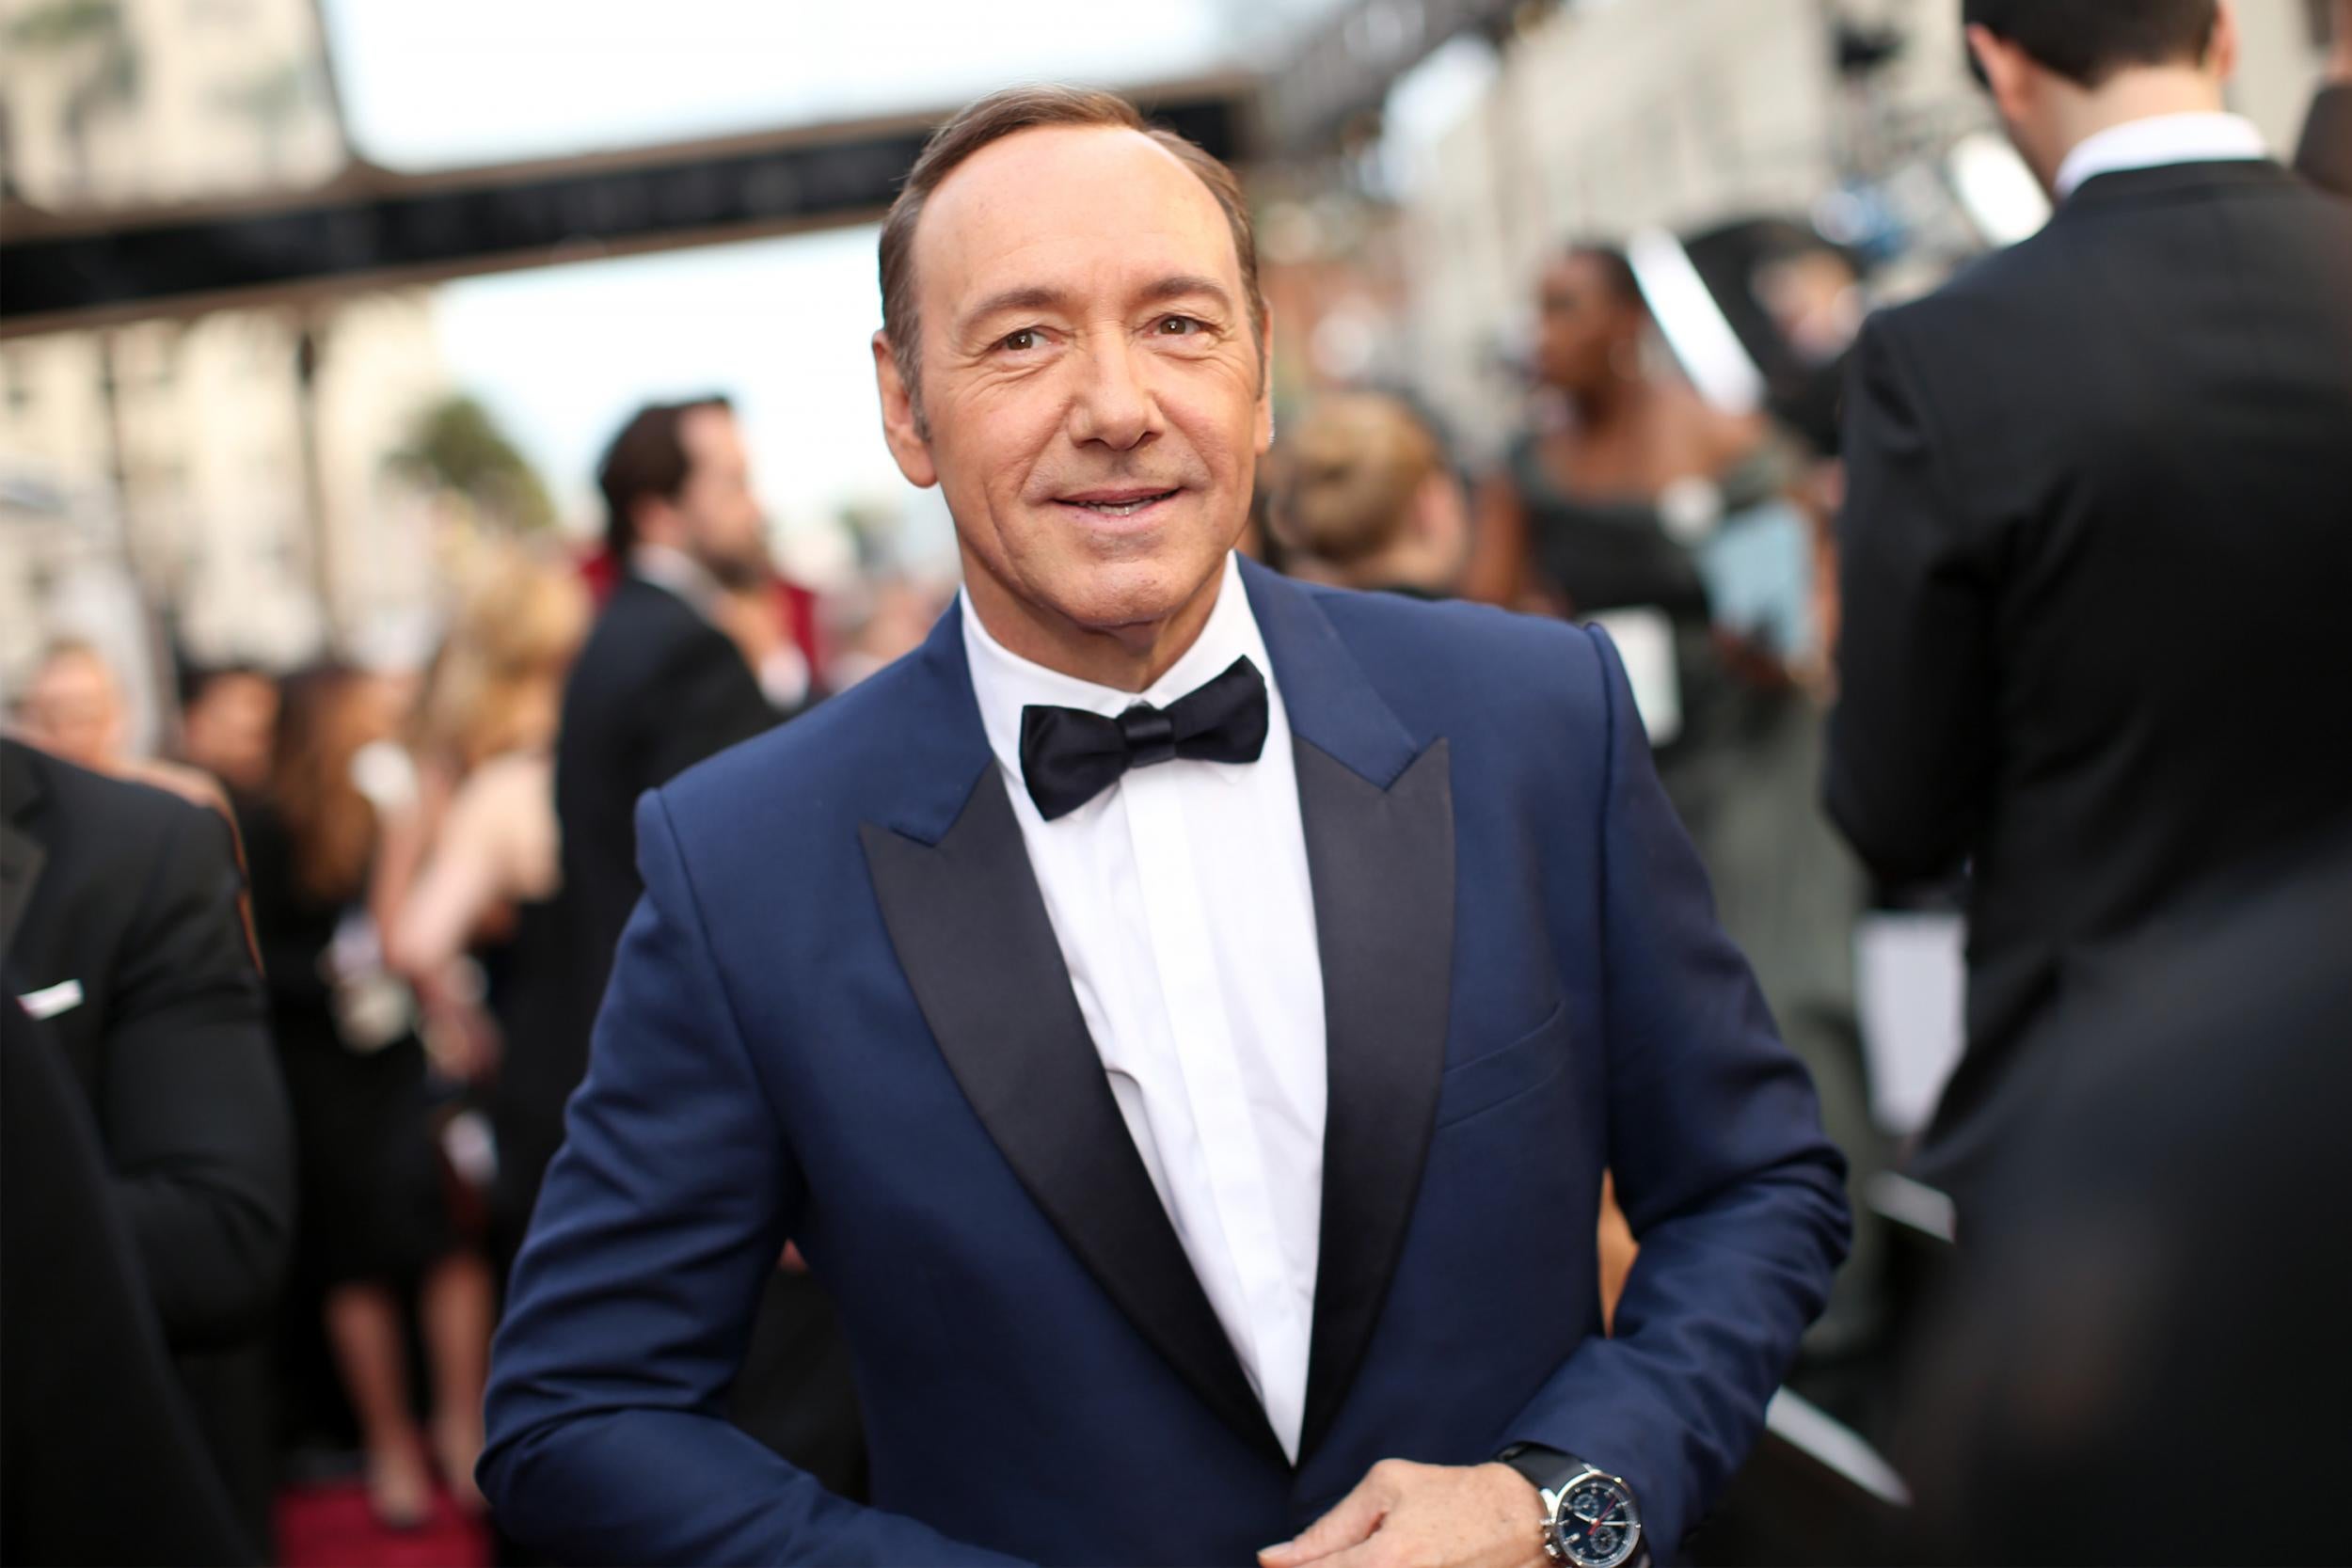 Spacey, 58, has been accused of making an unwanted sexual advance toward Star Trek actor Anthony Rapp in 1986